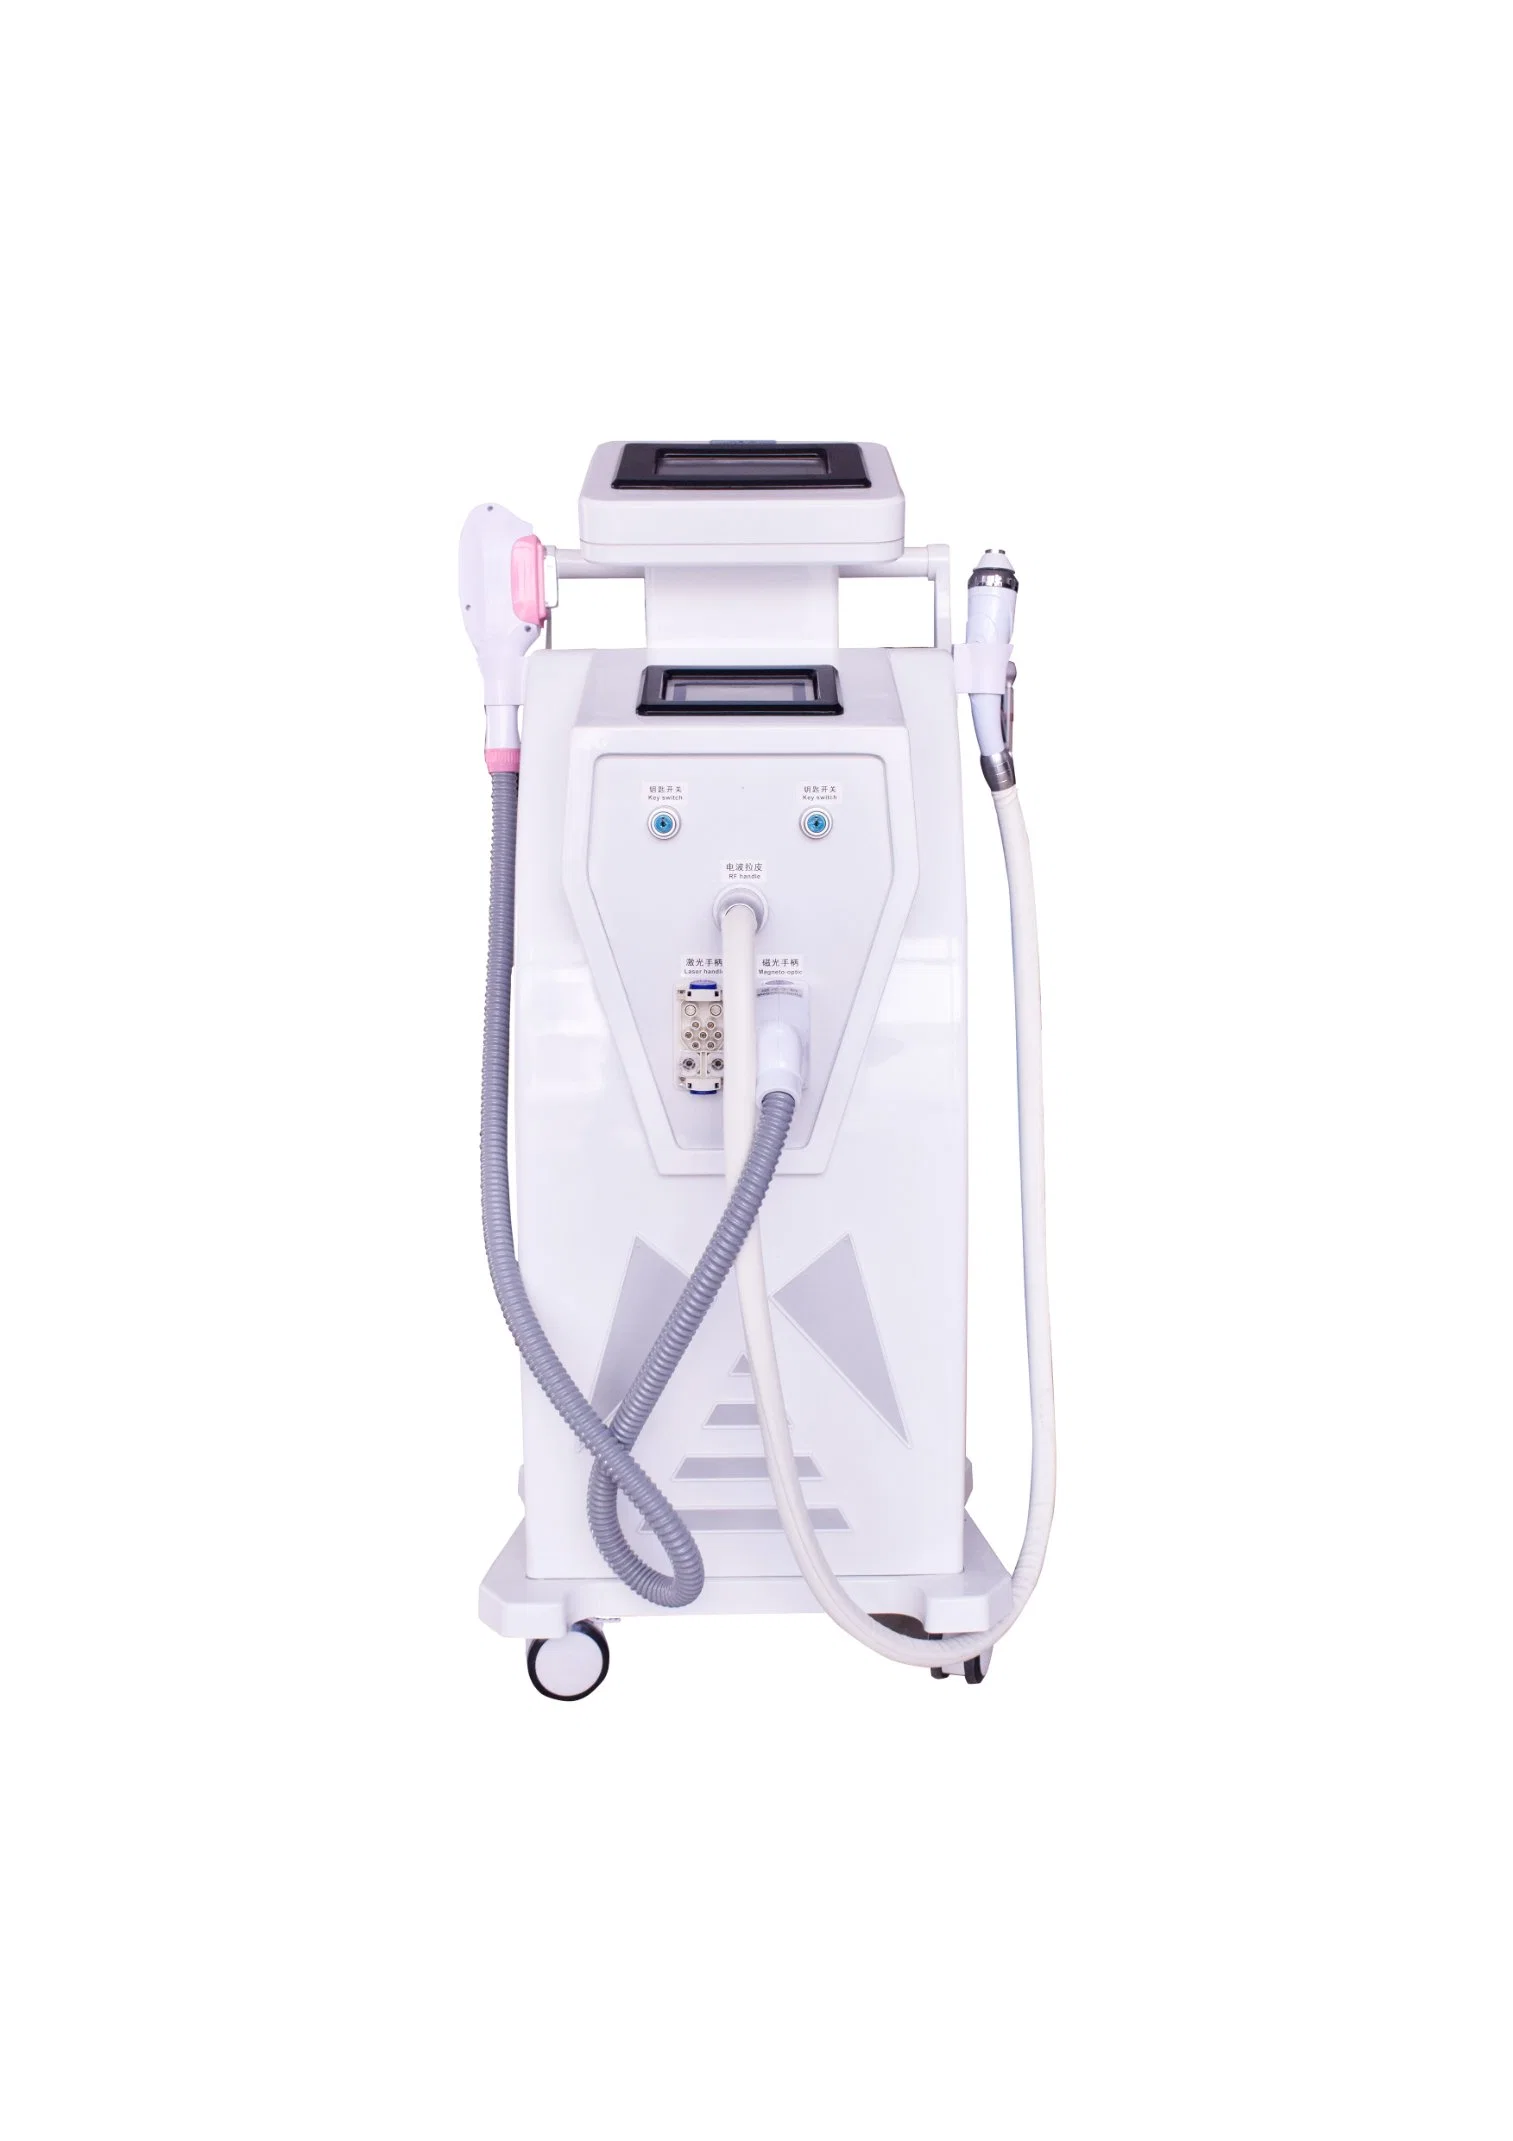 Magic Plus A0316 4 in 1 M22 Opt IPL Laser Hair Removal Machine for Sale ND YAG Laser Tattoo Removal Pico Second Laser